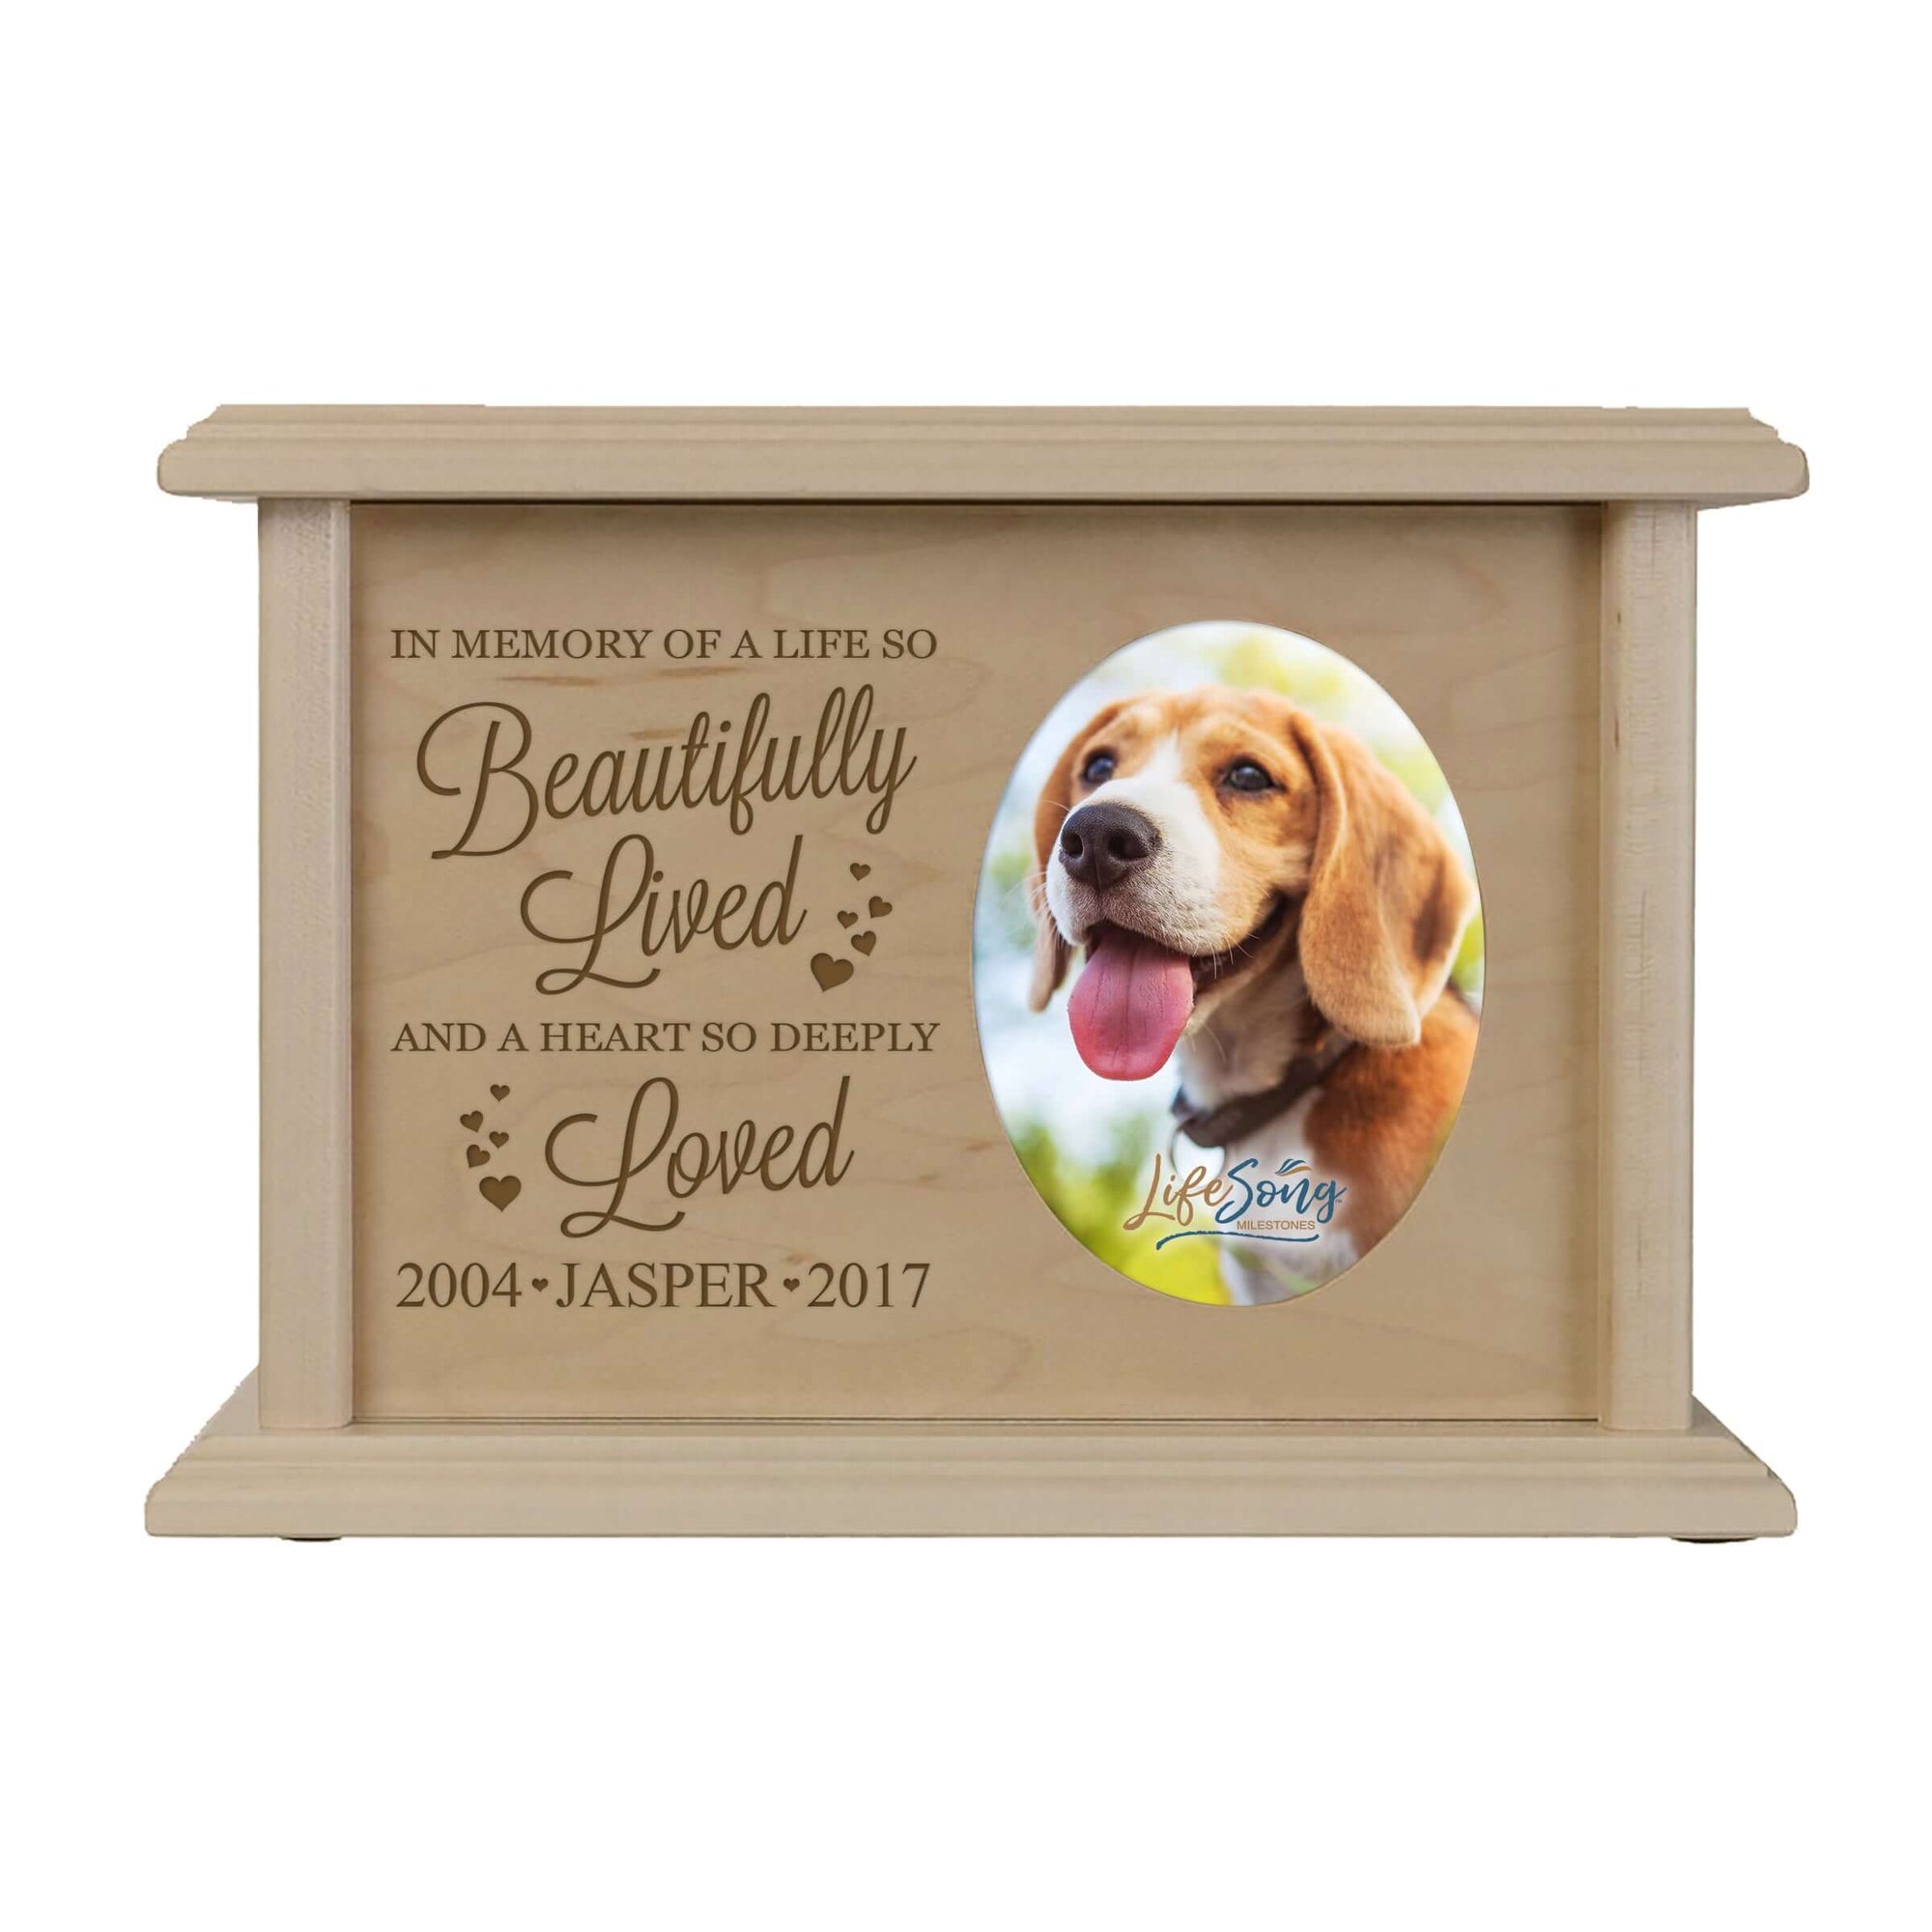 Pet Memorial Picture Cremation Urn Box for Dog or Cat - In Memory Of A Life So Beautifully Lived